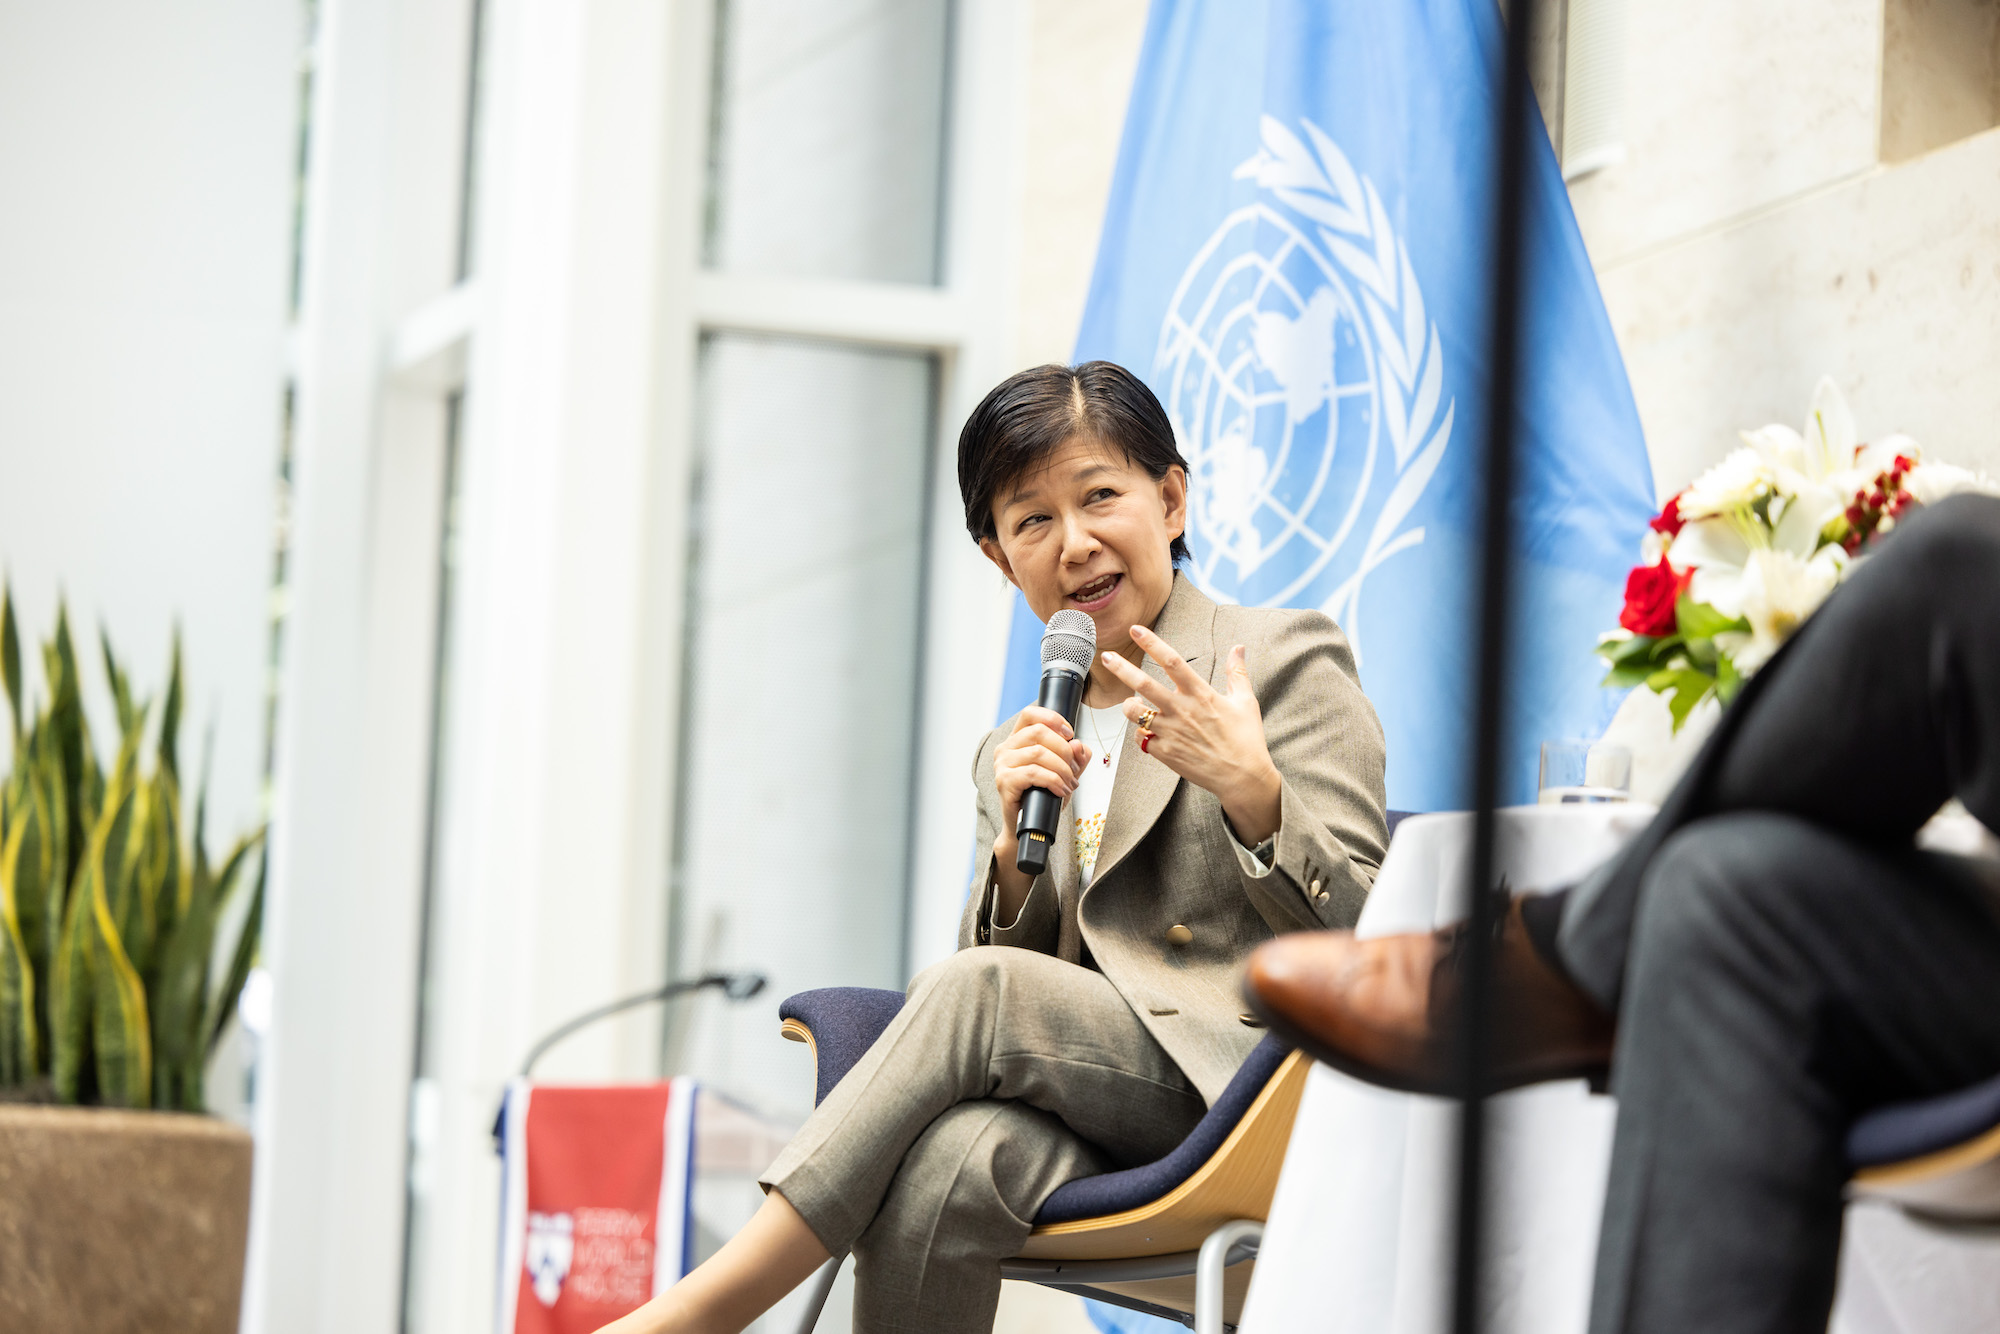  United Nations Under-Secretary-General and High Representative for Disarmament Affairs Izumi Nakamitsu speaks at Penn's Perry World House.